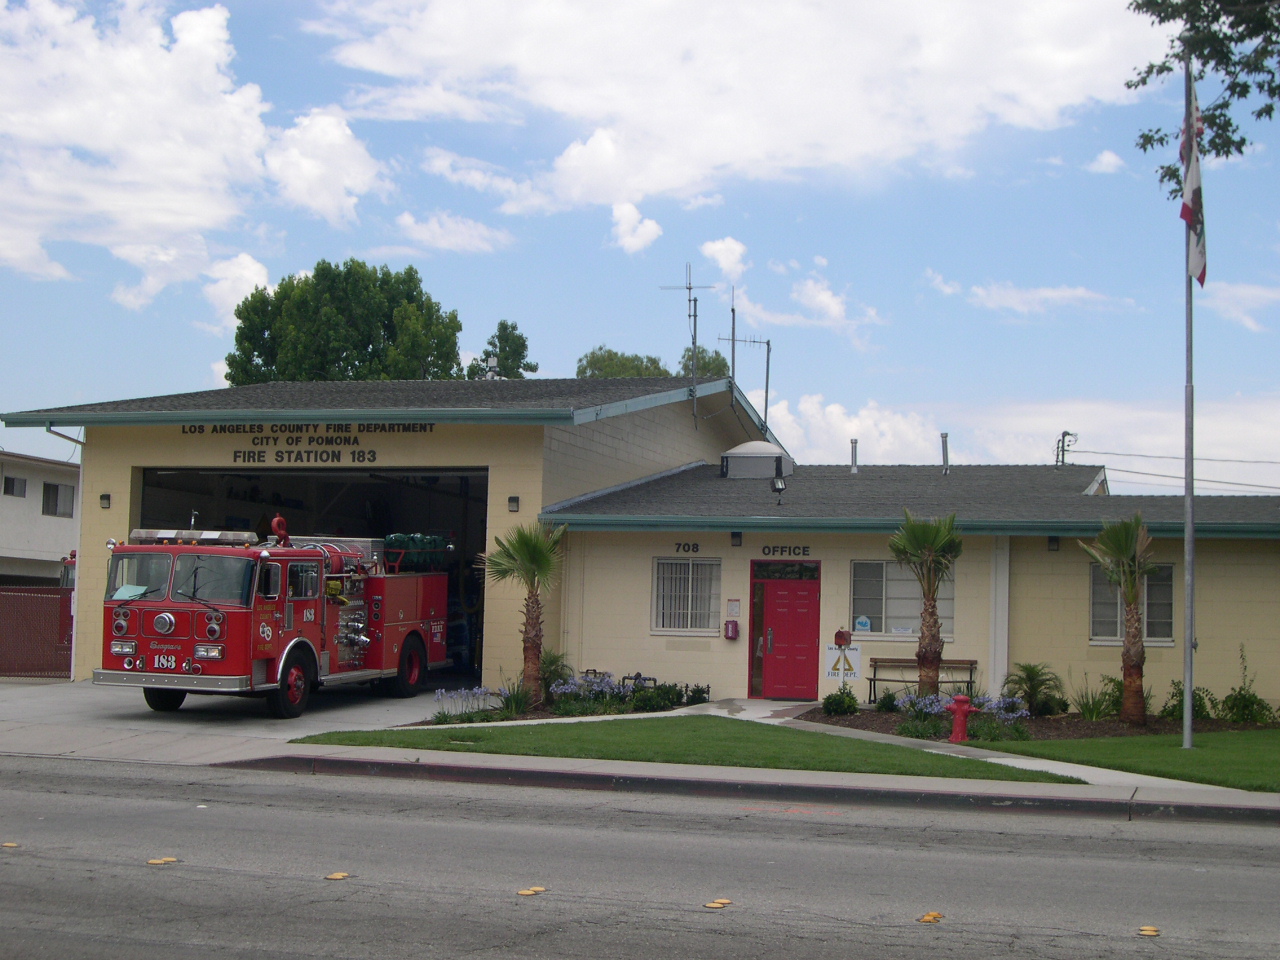 Firetruck 183 parked inside of its station. Station is yellow and has a bright red door. Surrounded by clear skies and the California flag